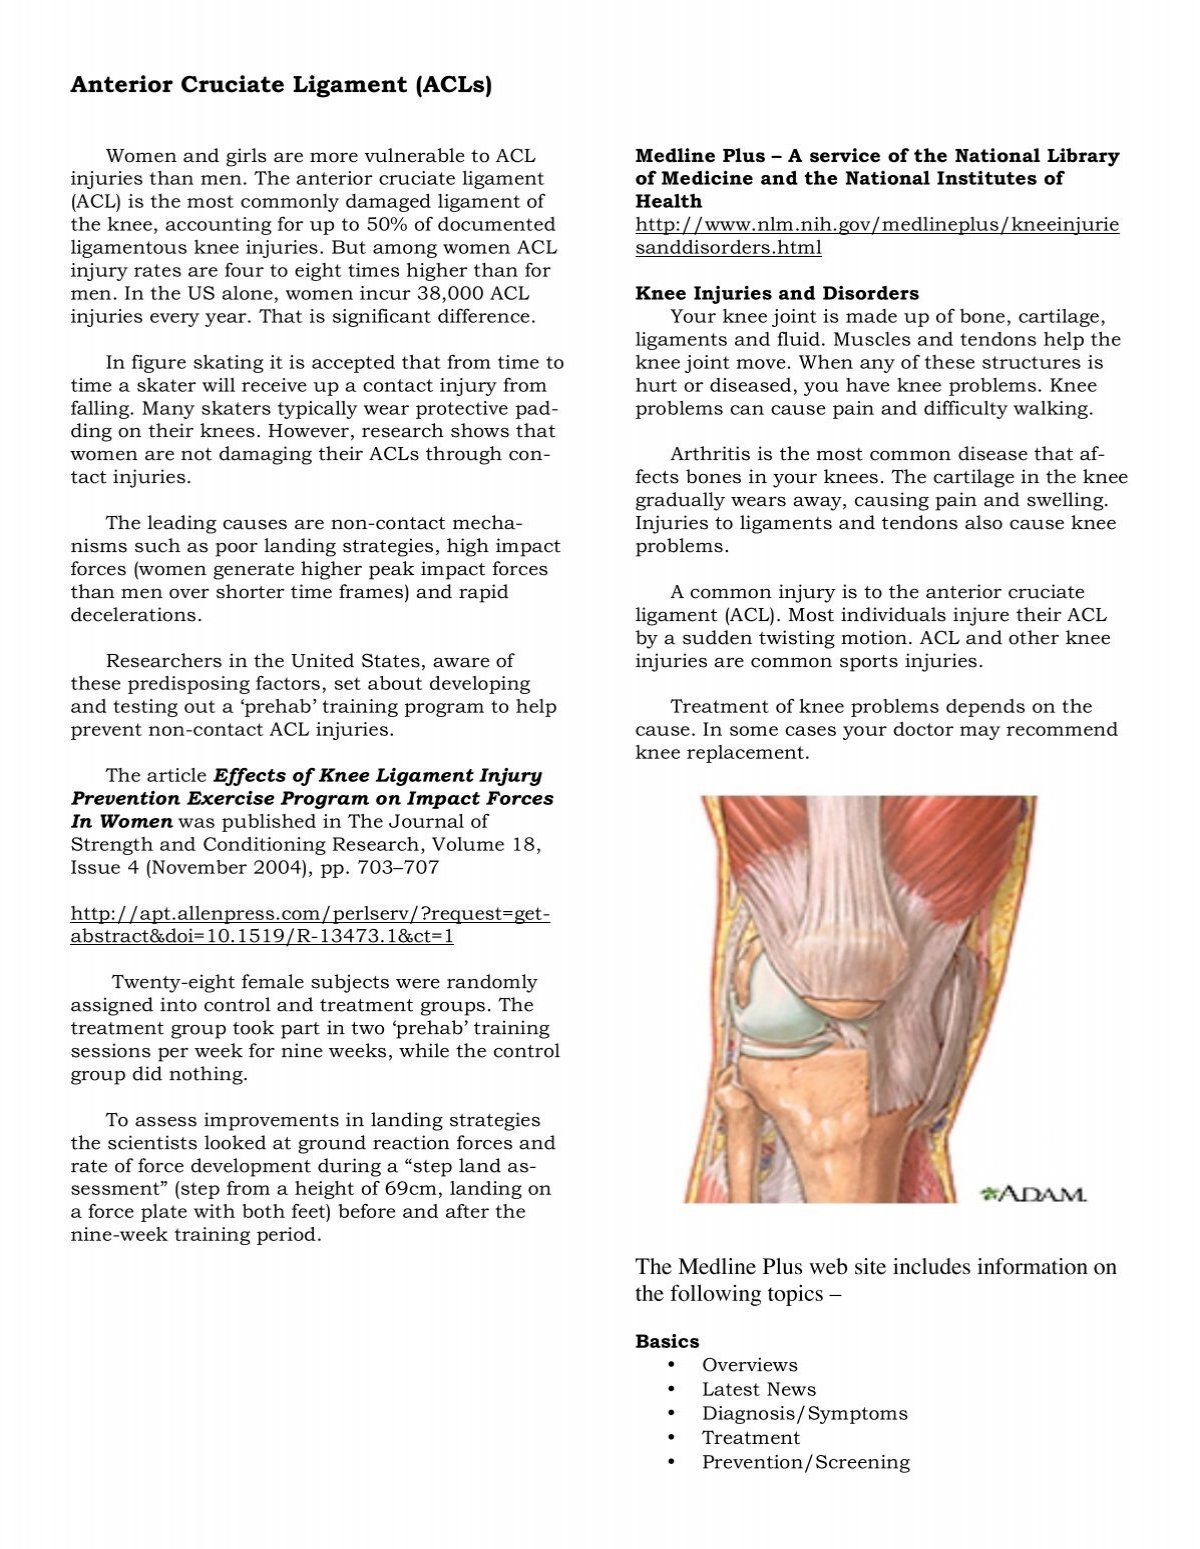 Anterior cruciate ligament (ACL) injury: MedlinePlus Medical Encyclopedia